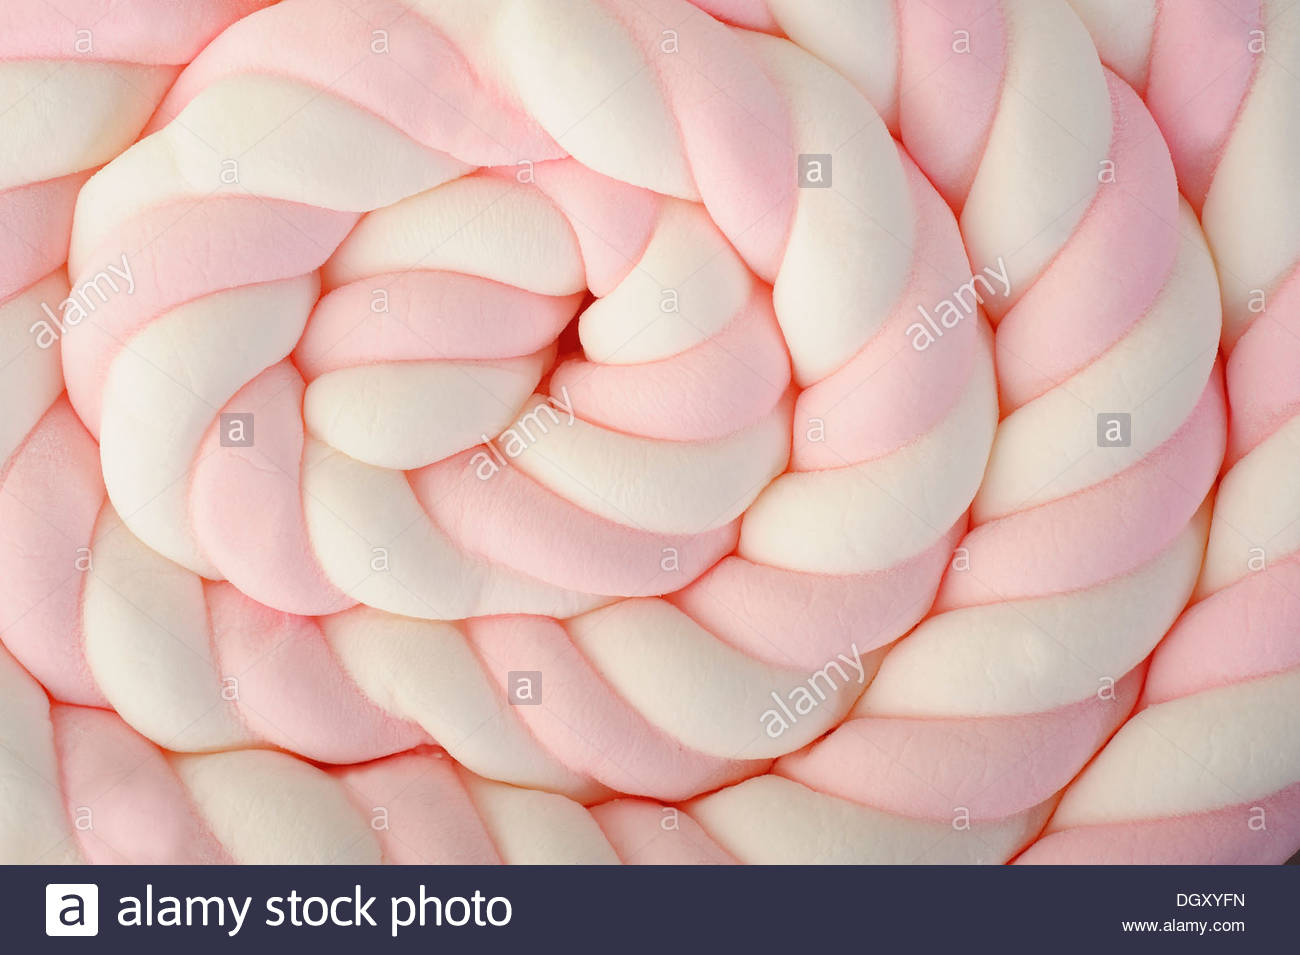 Pink And White Marshmallow Background Stock Photo